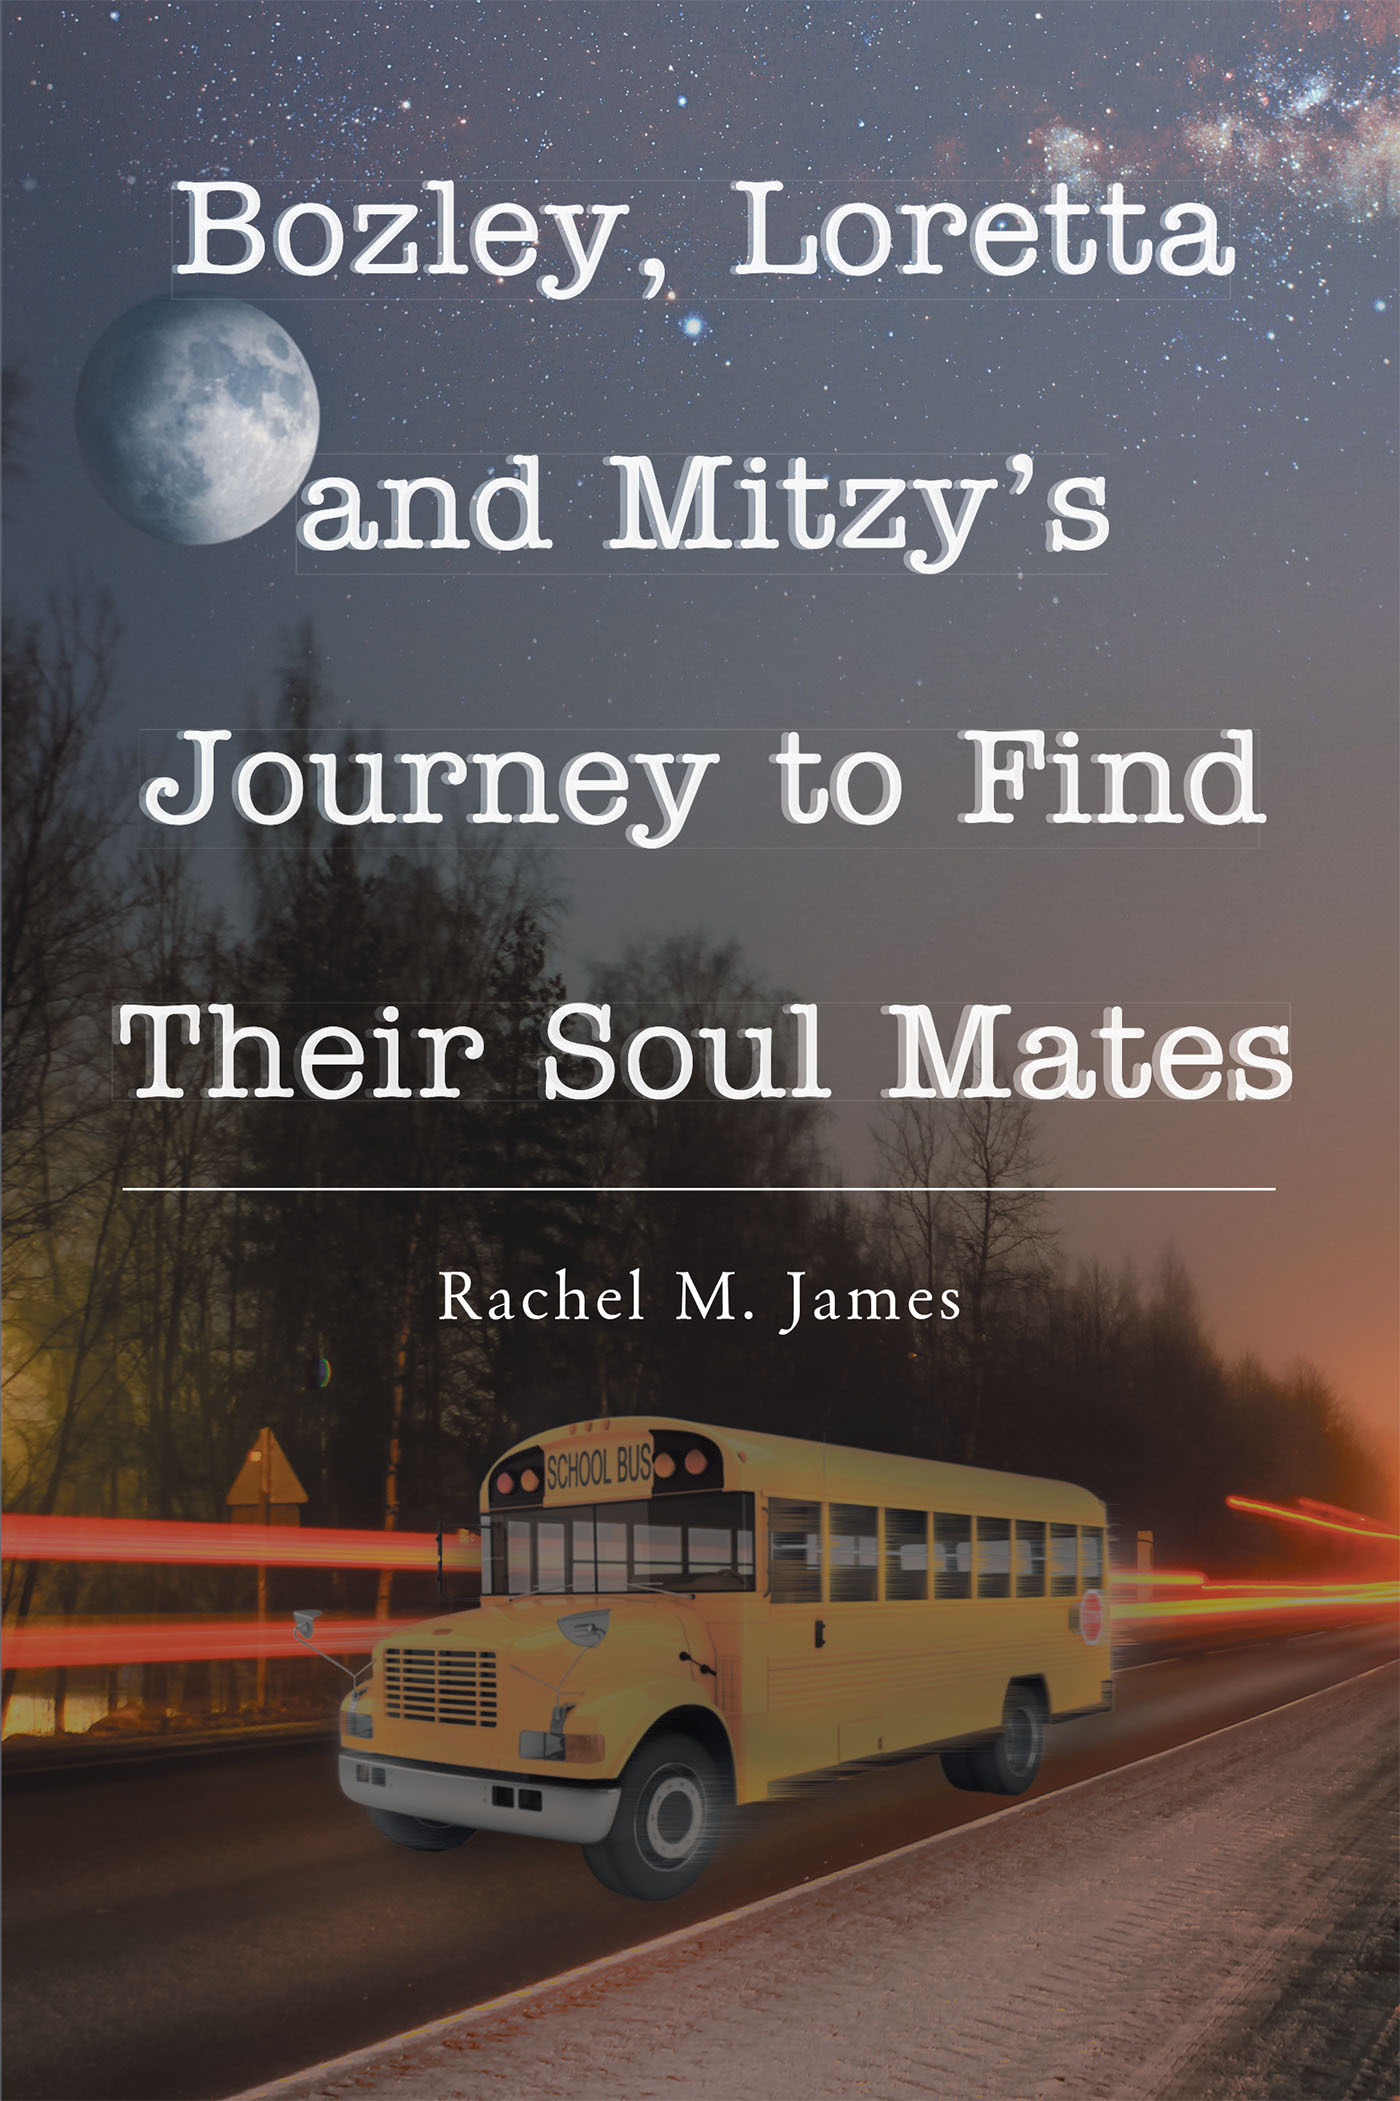 Bozley, Loretta and Mitzy's Journey to Find Their Soul Mates  Cover Image